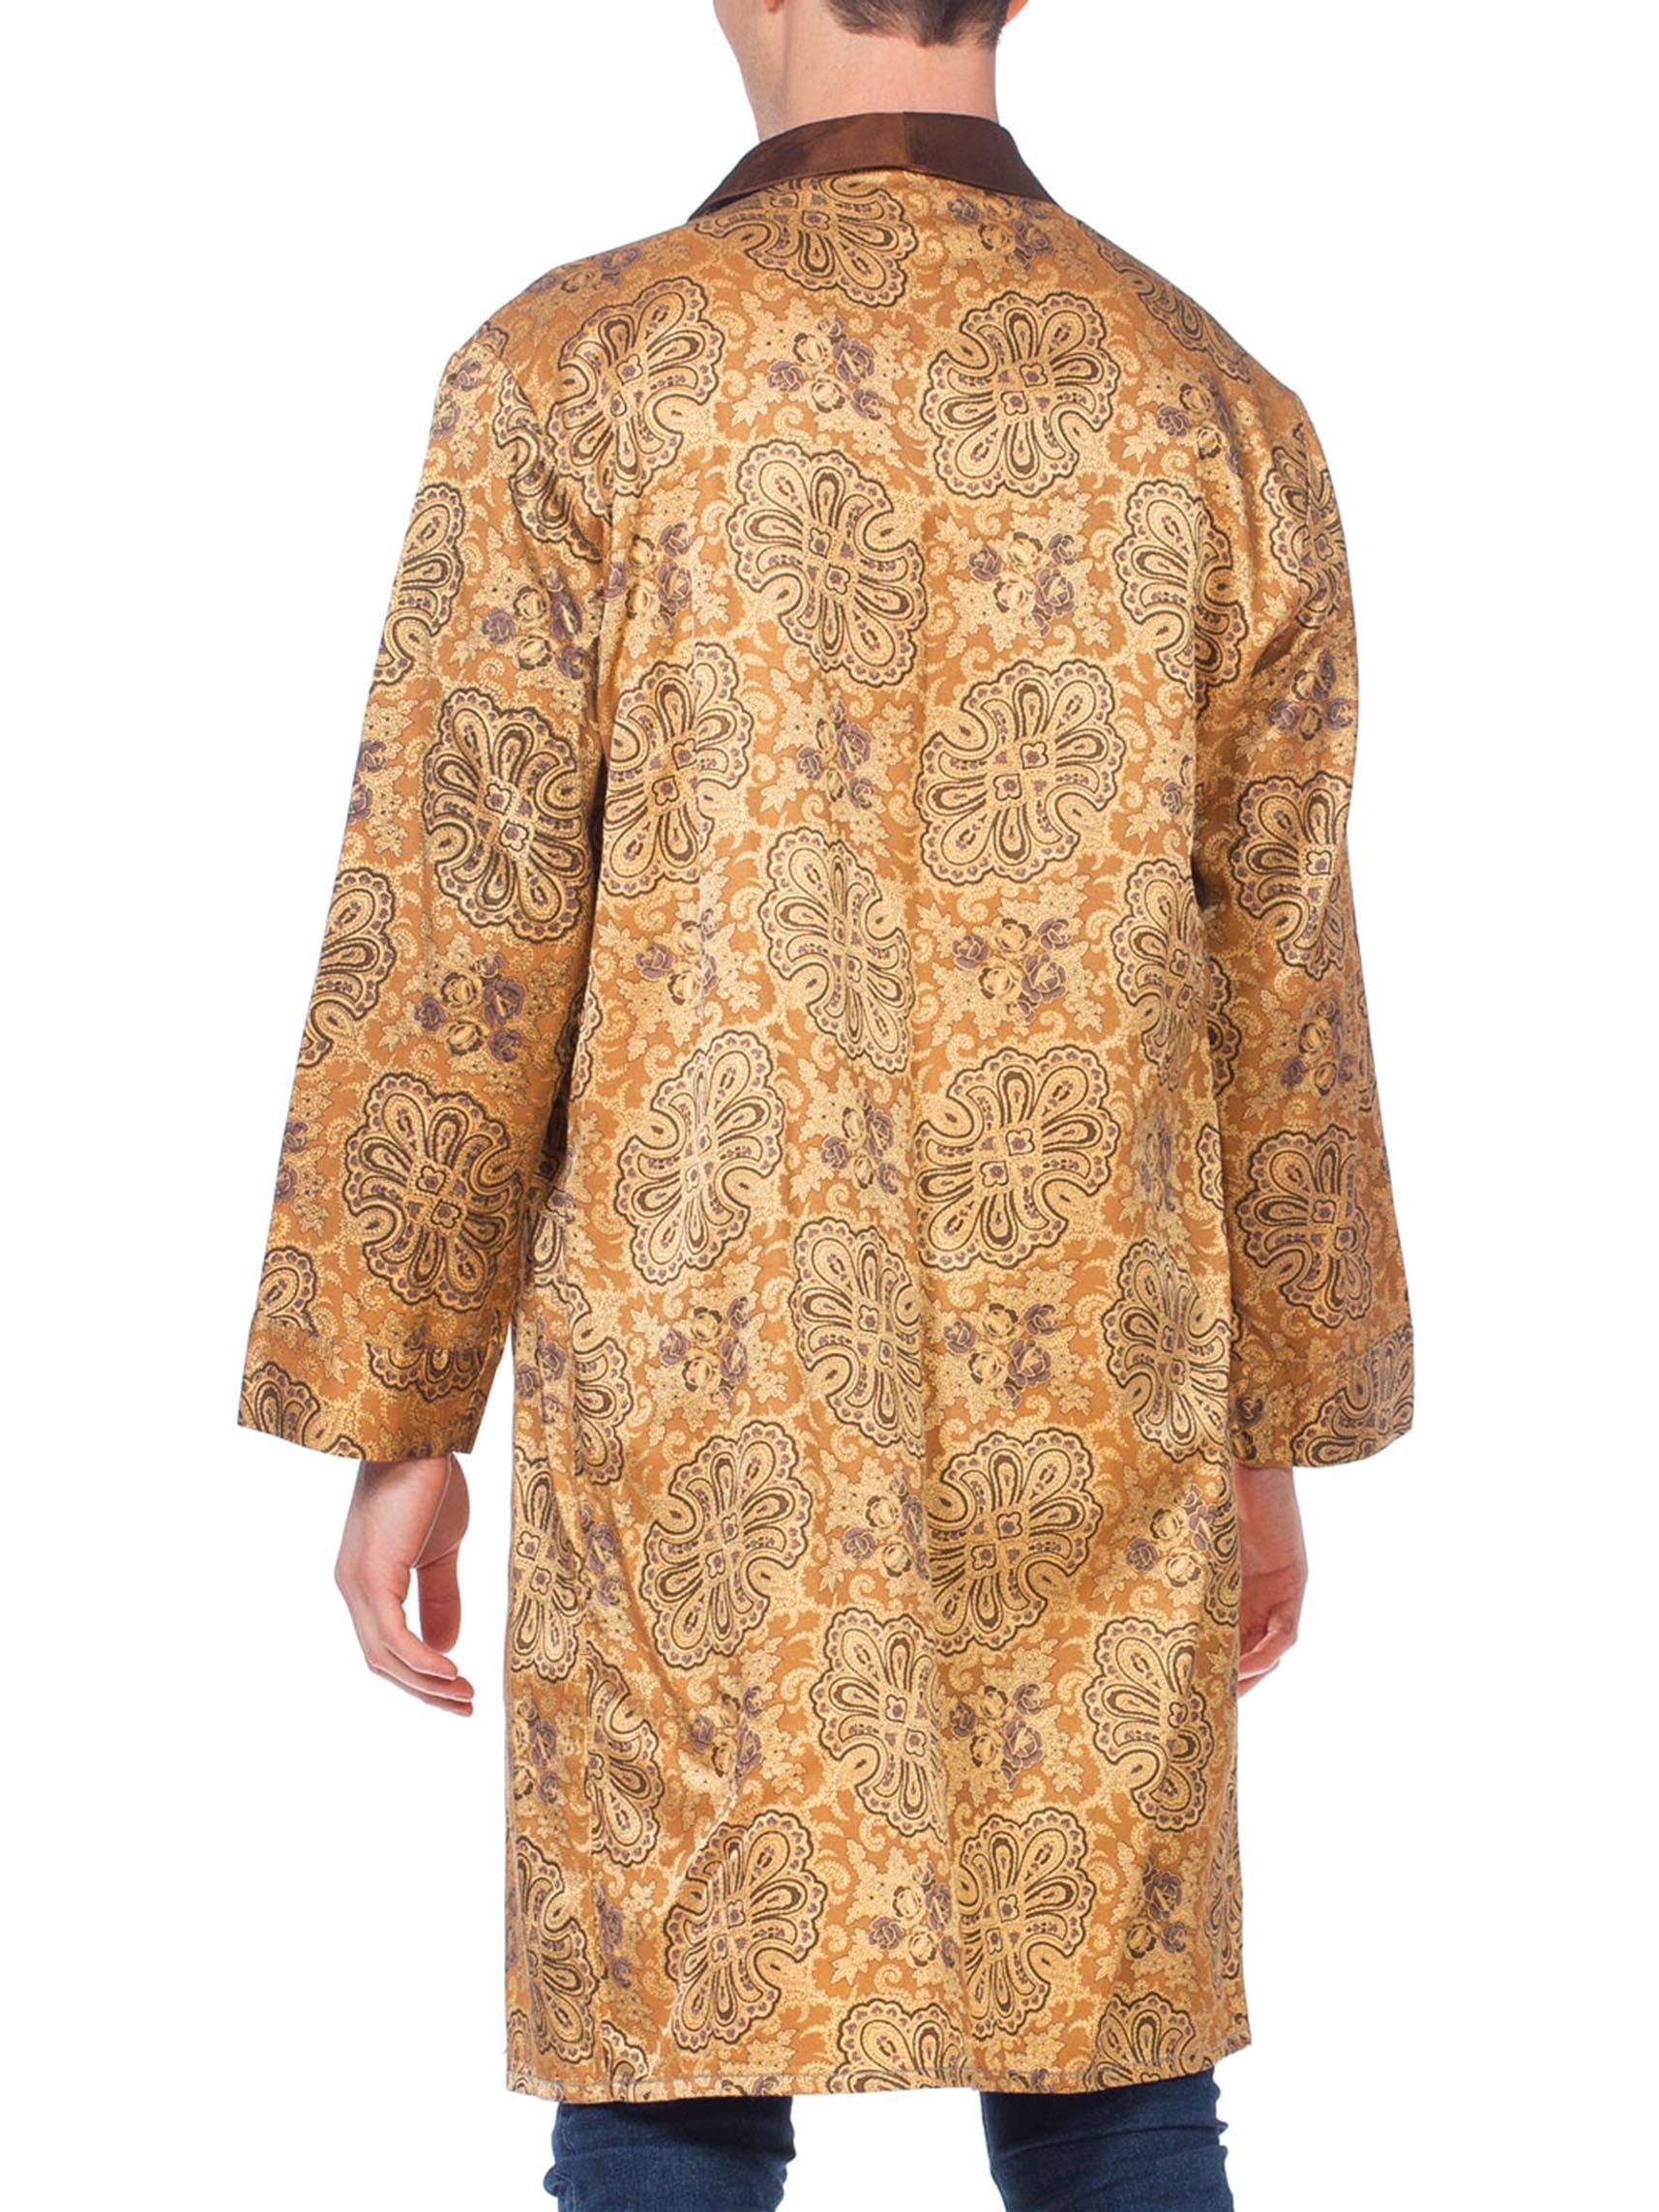 Mens 1960's Satin Flanel Gold Paisley Robe with Belt 1